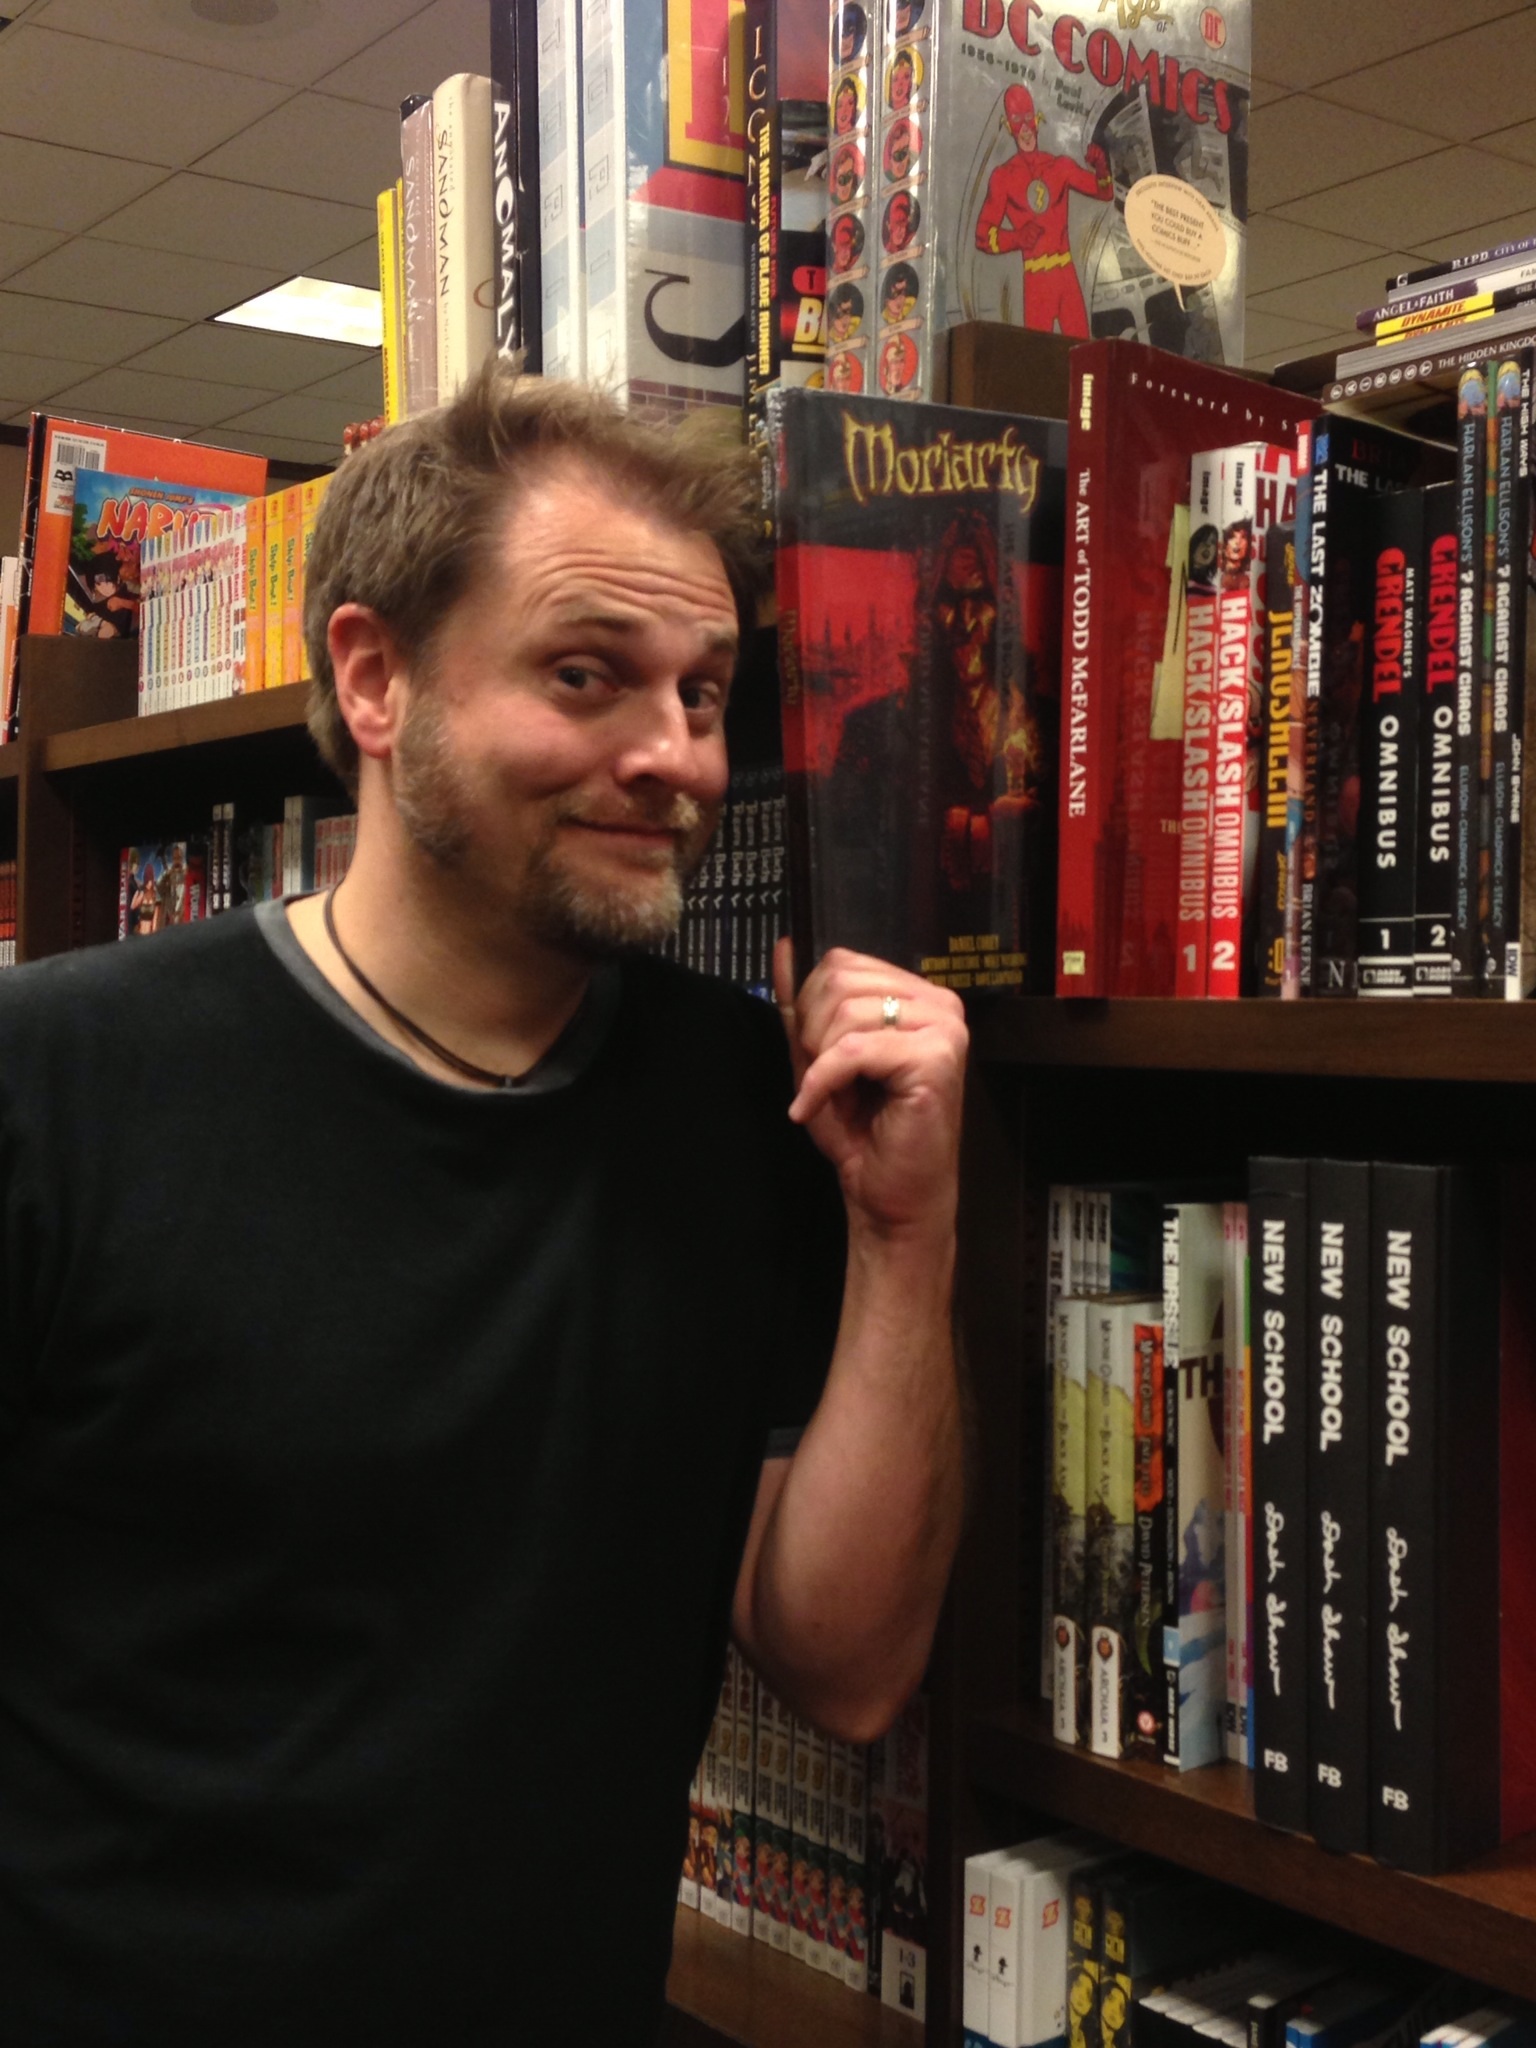 Daniel Corey and his Image Comics MORIARTY Deluxe Edition Hardcover at Barnes & Noble.